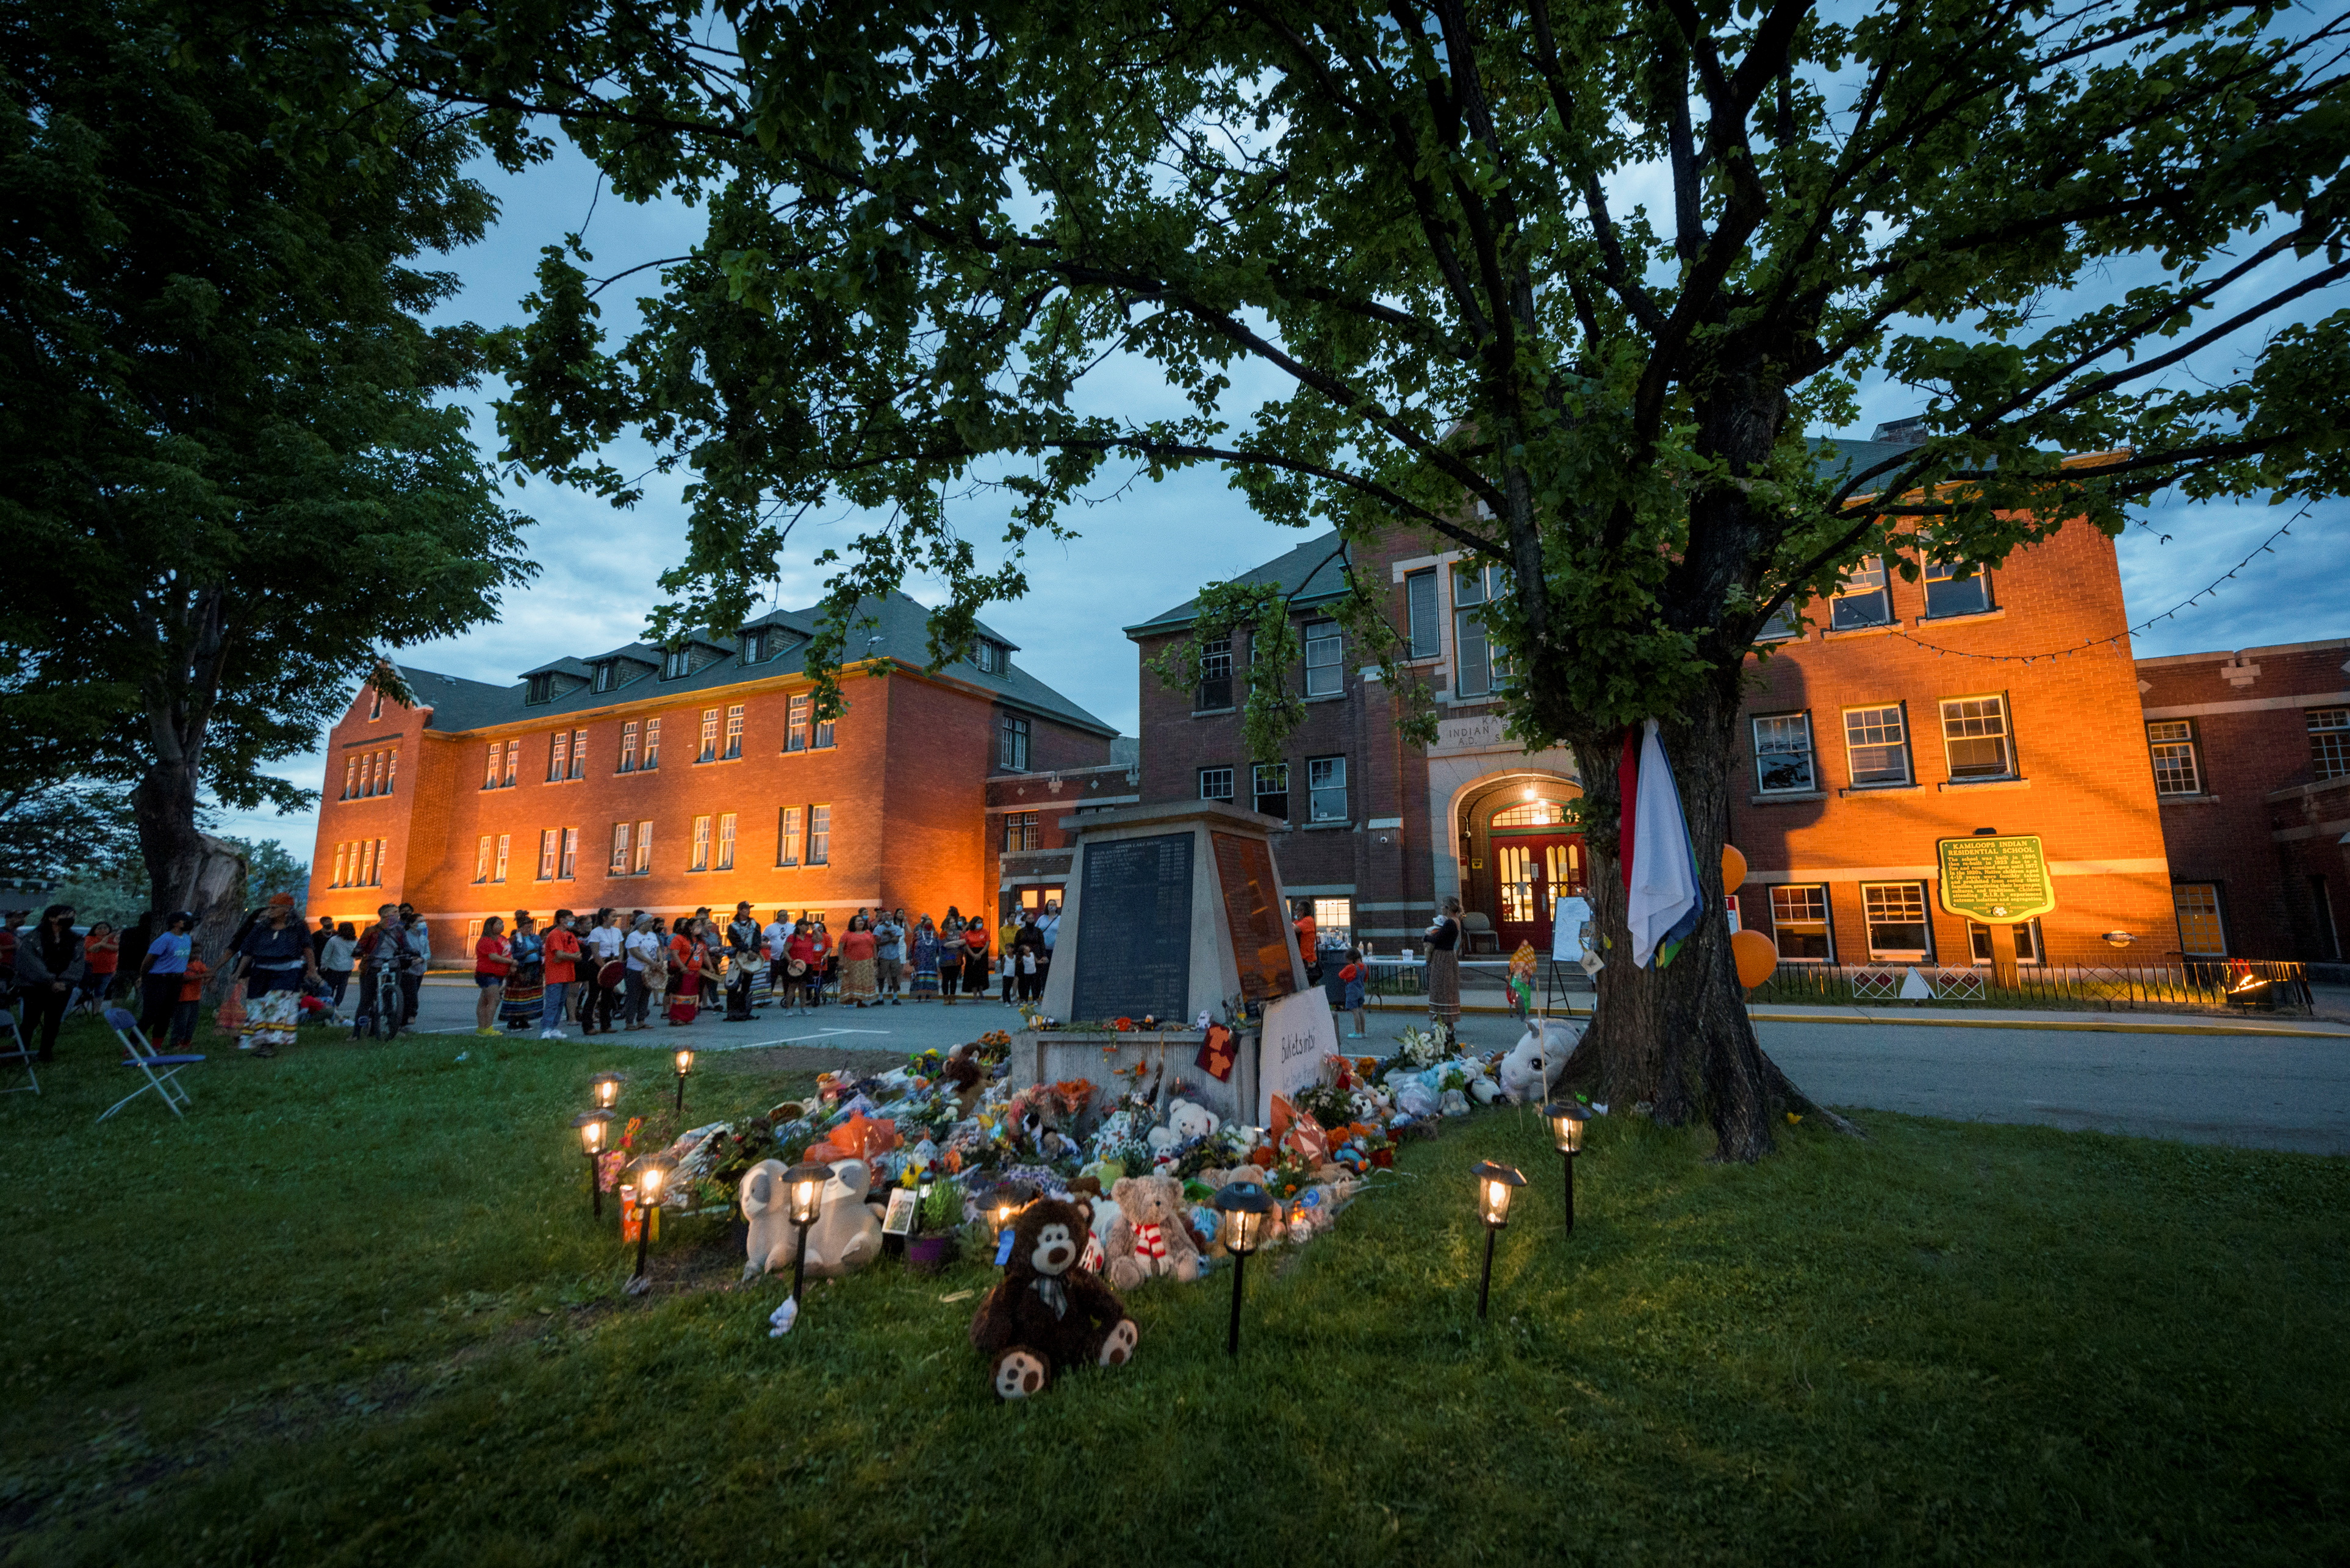 Kamloops residents and First Nations people gather to listen to drummers and singers at a memorial in front of the former Kamloops Indian Residential School after the remains of 215 children, some as young as three years old, were found at the site last week, in Kamloops, British Columbia, Canada May 31, 2021. REUTERS/Dennis Owen